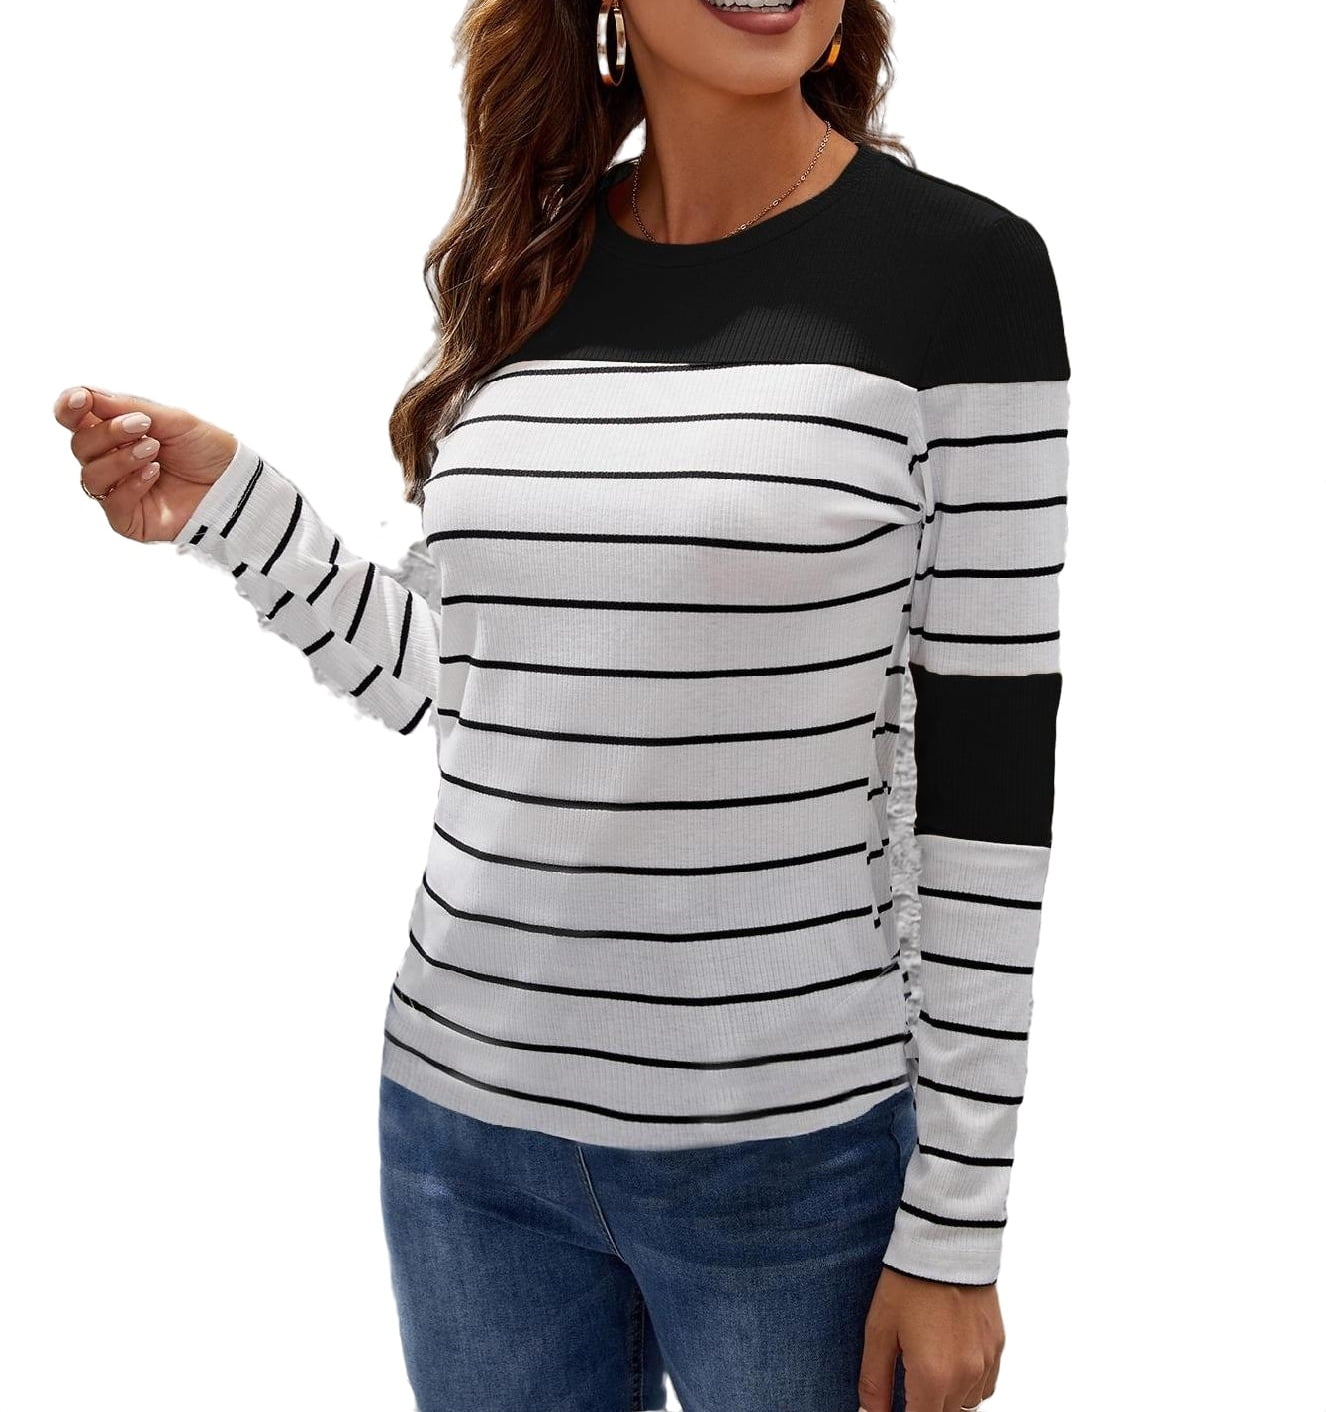 Casual Colorblock Round Neck Long Sleeve Black and White Women's T-Shirts ( Women's)